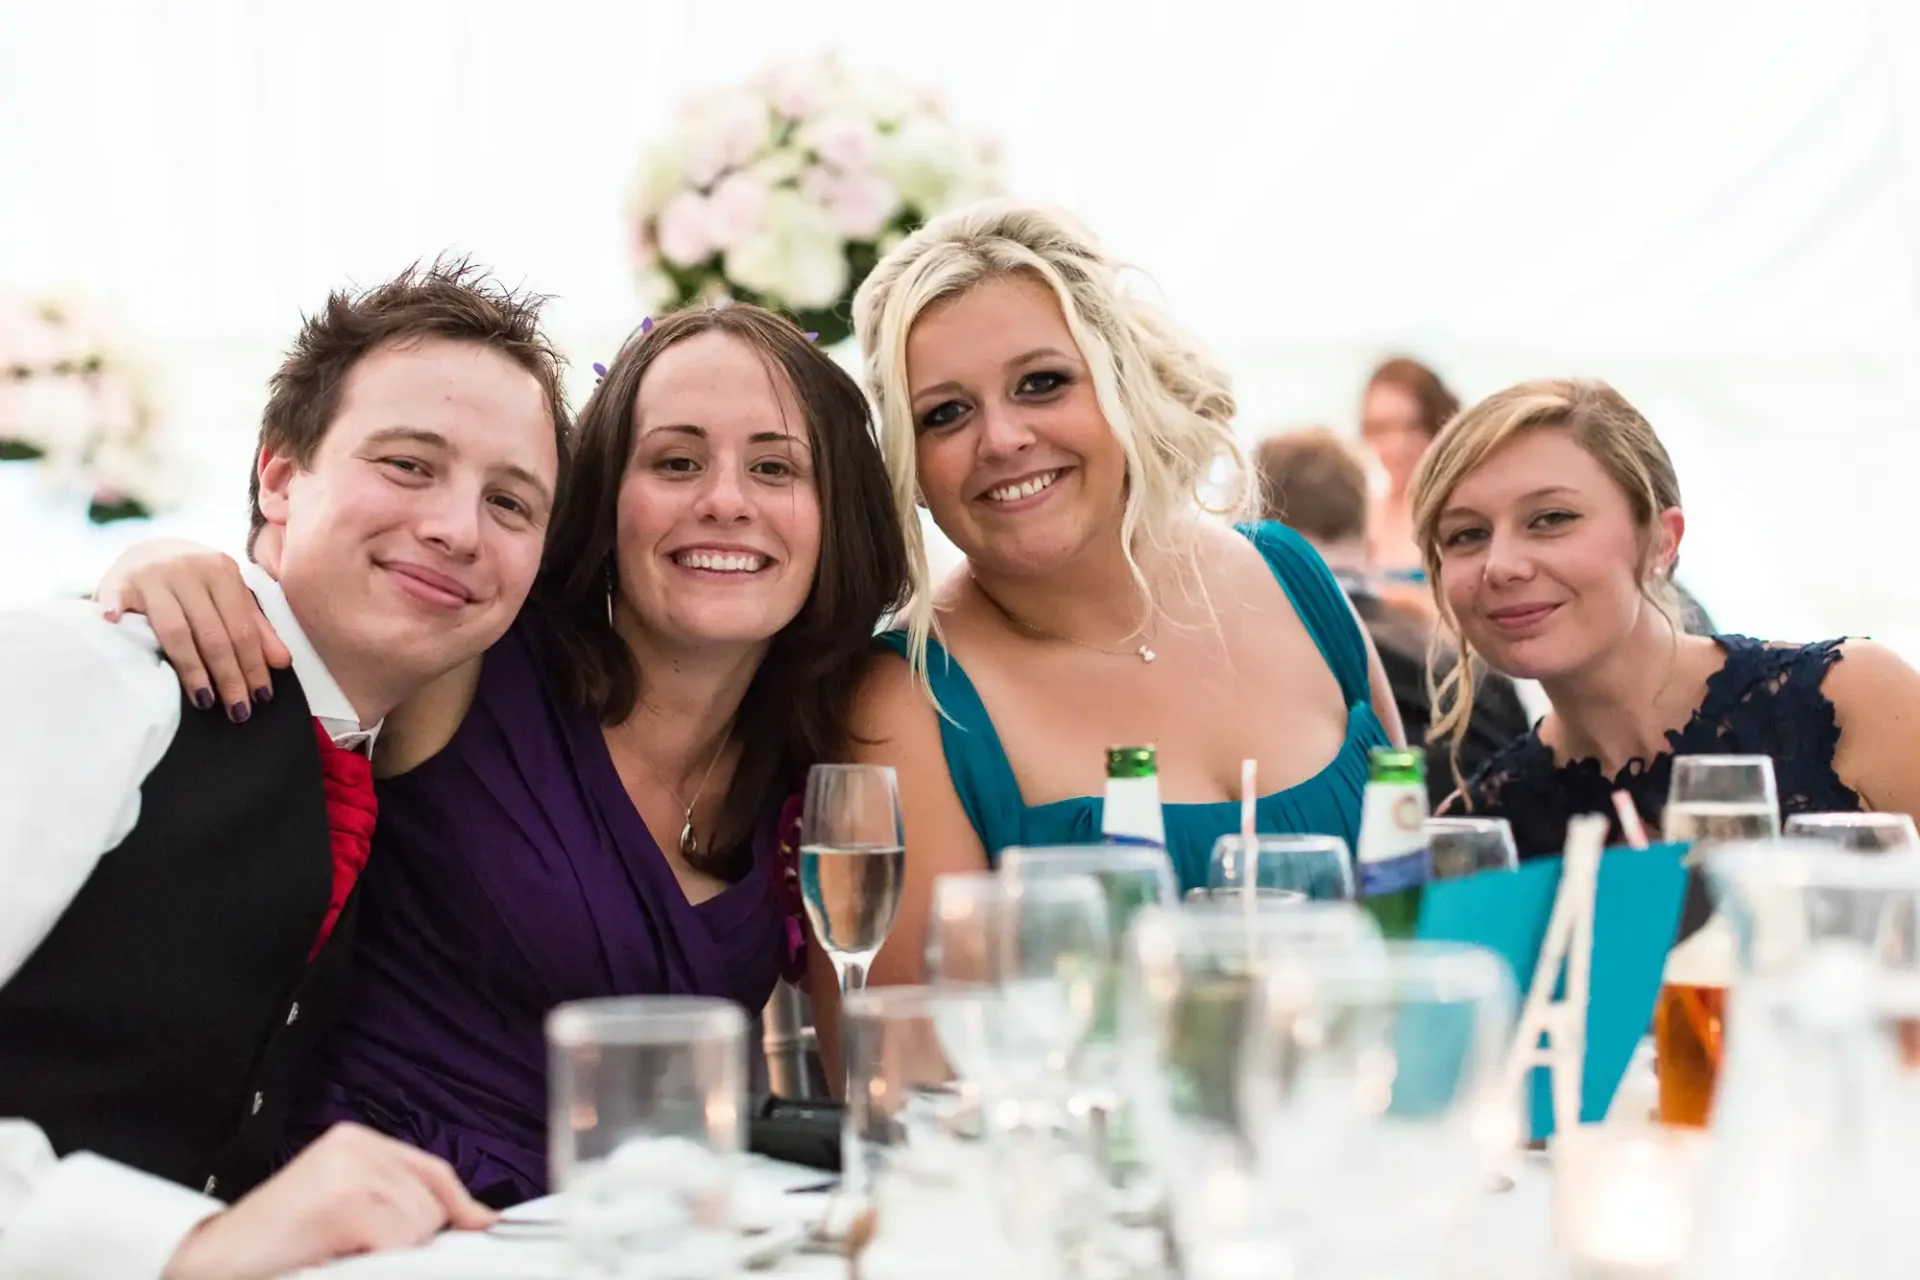 Four friends smiling at a wedding reception table, surrounded by drinks and floral decorations.